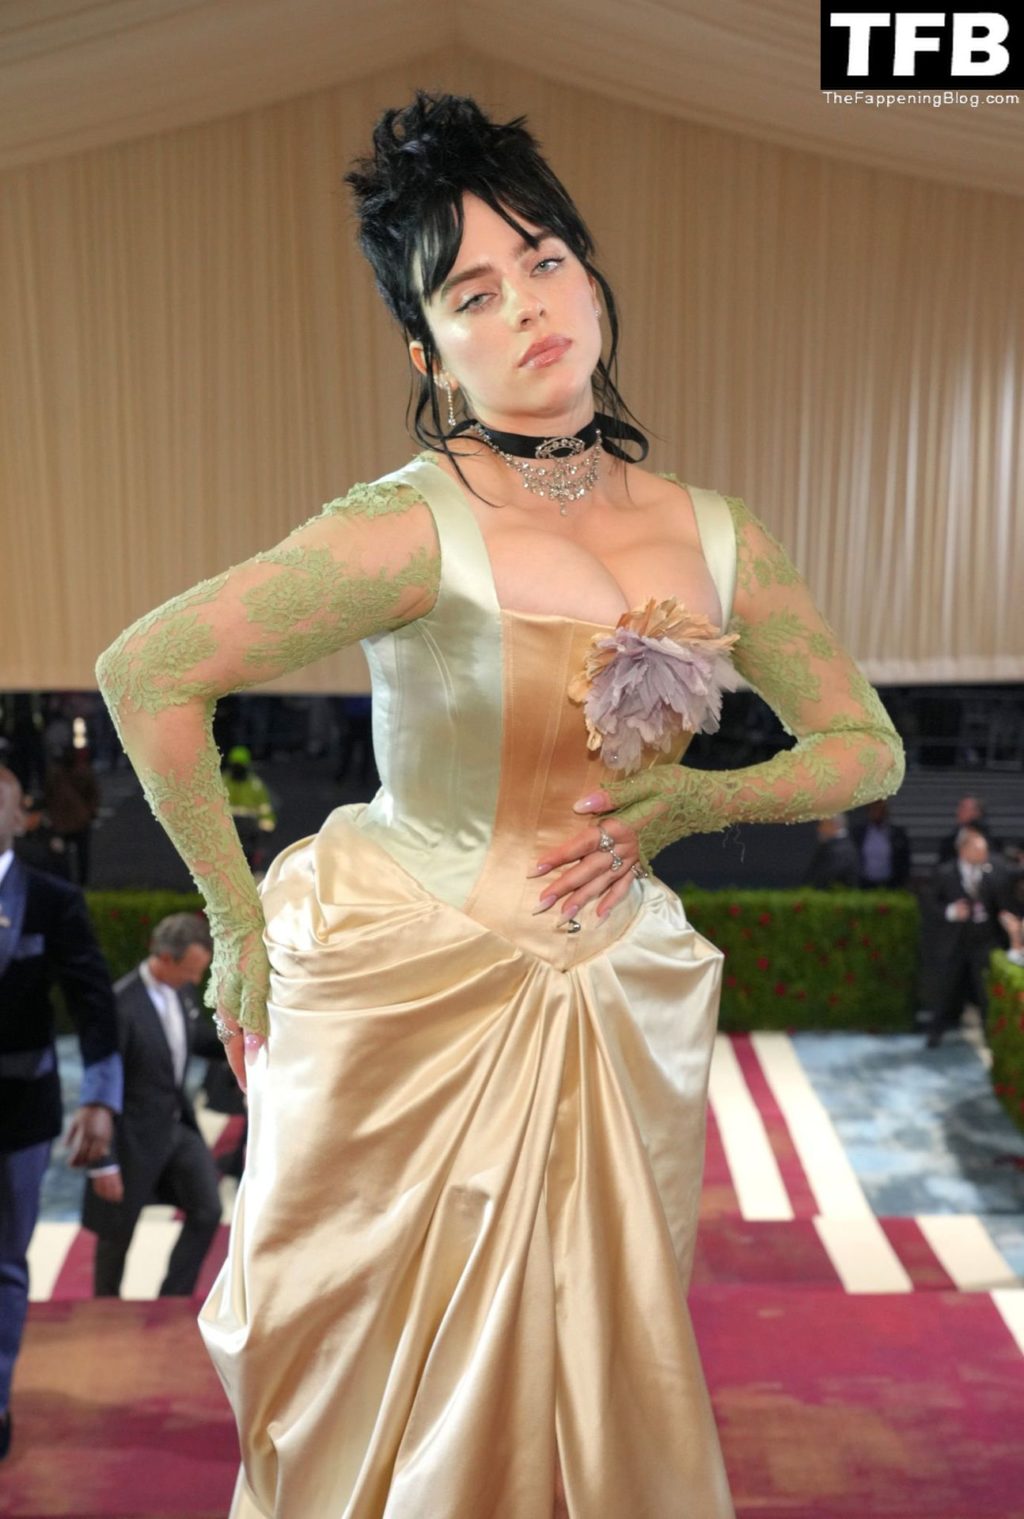 Billie Eilish Sexy The Fappening Blog 69 1024x1519 - Billie Eilish Showcases Nice Cleavage at The 2022 Met Gala in NYC (155 Photos)